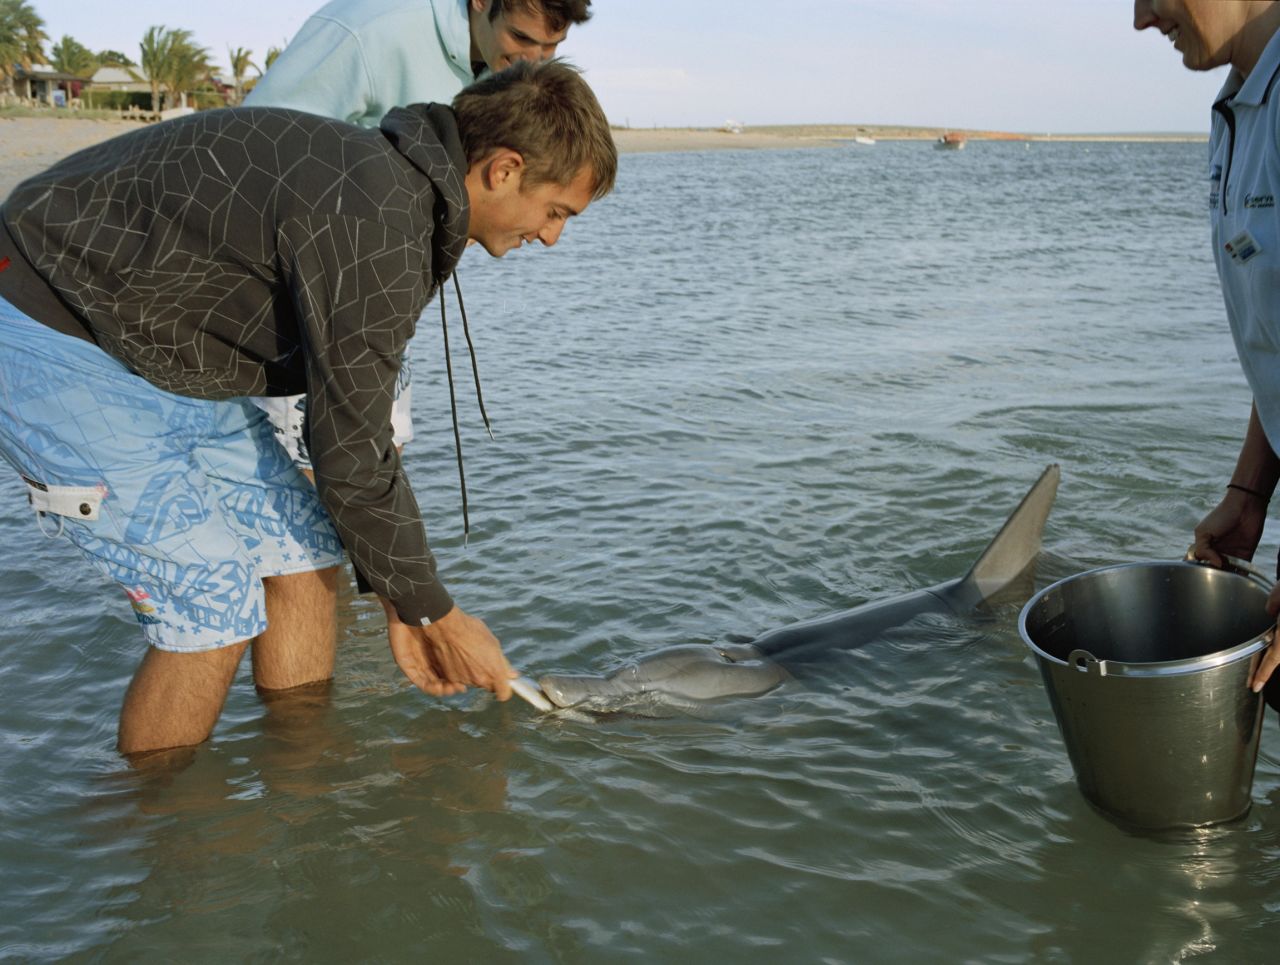 Dolphins come to shore each day to be fed in the shallow waters of the Shark Bay peninsula, 850 kilometers north of Perth.